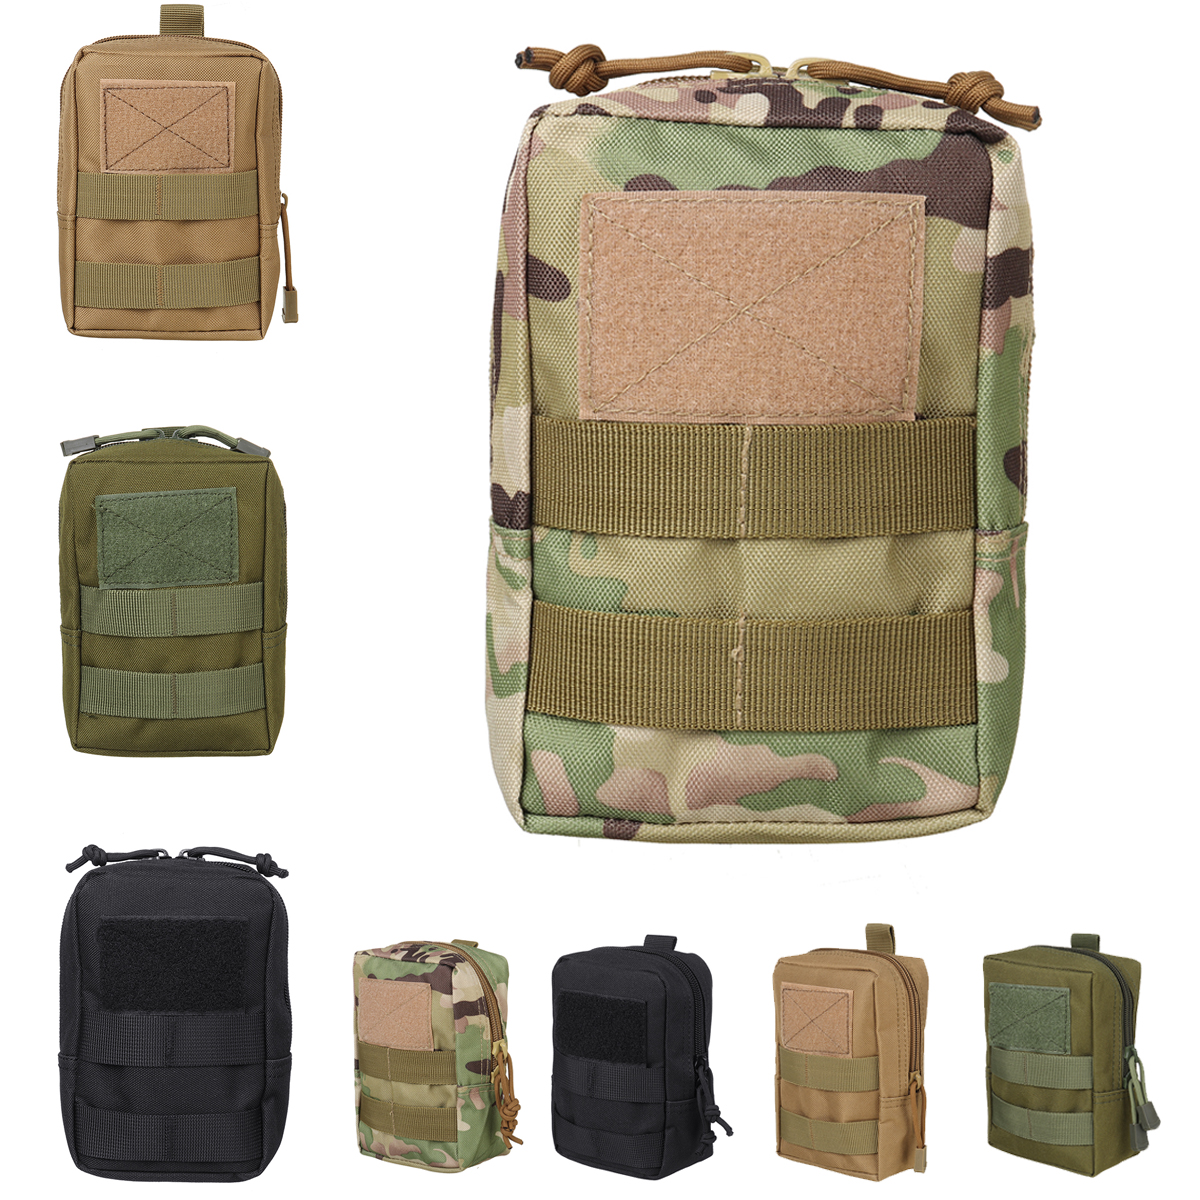 Military-Tactical-Camo-Belt-Pouch-Bag-Pack-Phone-Bags-Molle-Pouch-Camping-Waist-Pocket-Bag-Phone-Cas-1777605-1